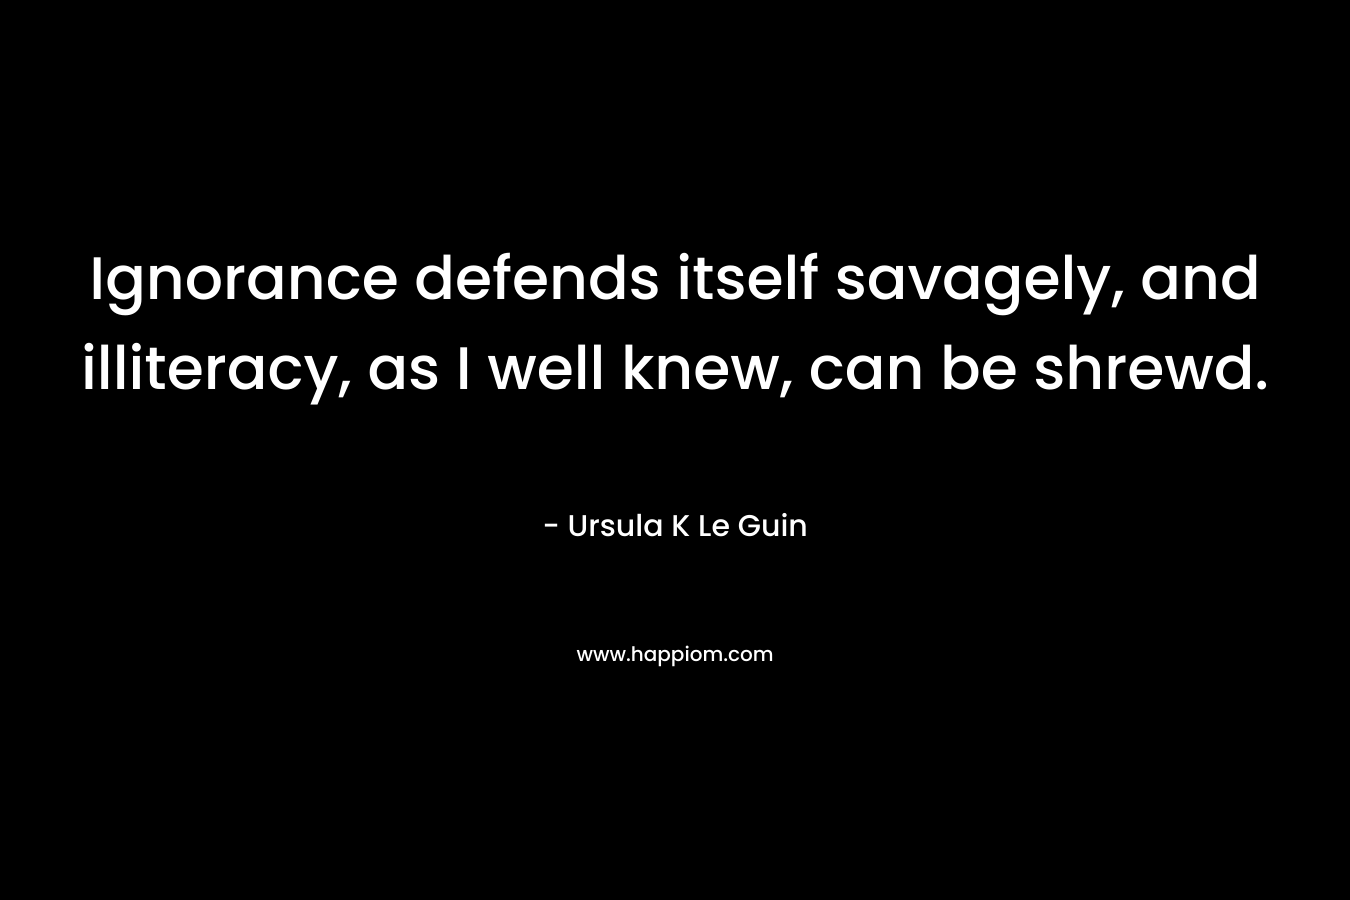 Ignorance defends itself savagely, and illiteracy, as I well knew, can be shrewd. – Ursula K Le Guin